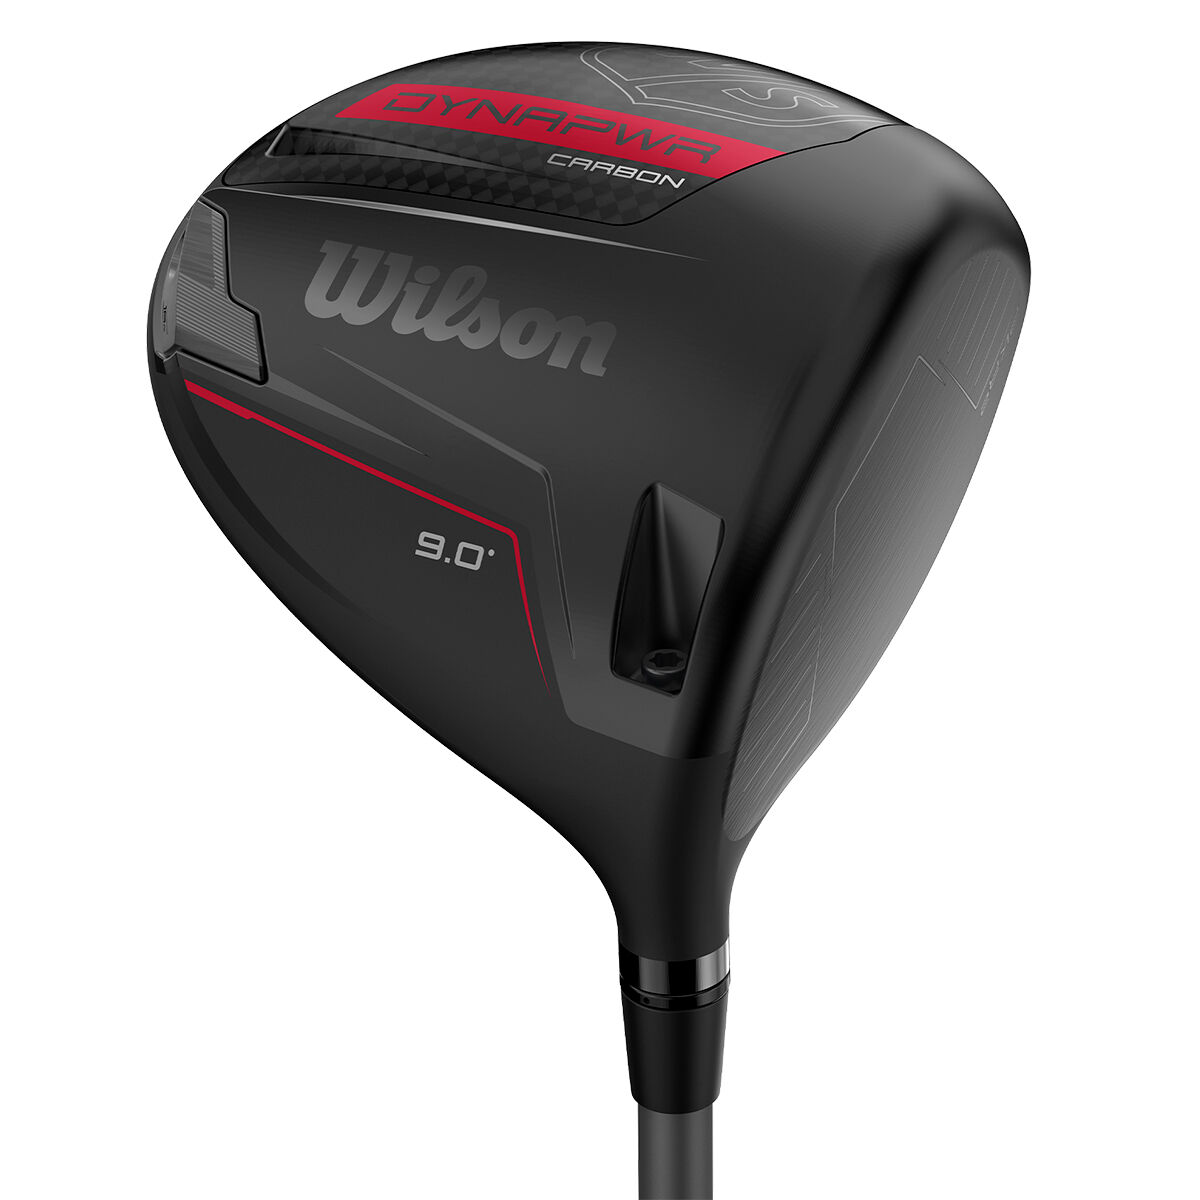 Wilson Staff Men’s Black and Red Adjustable Dynapower Carbon Custom Fit Golf Driver | American Golf, One Size